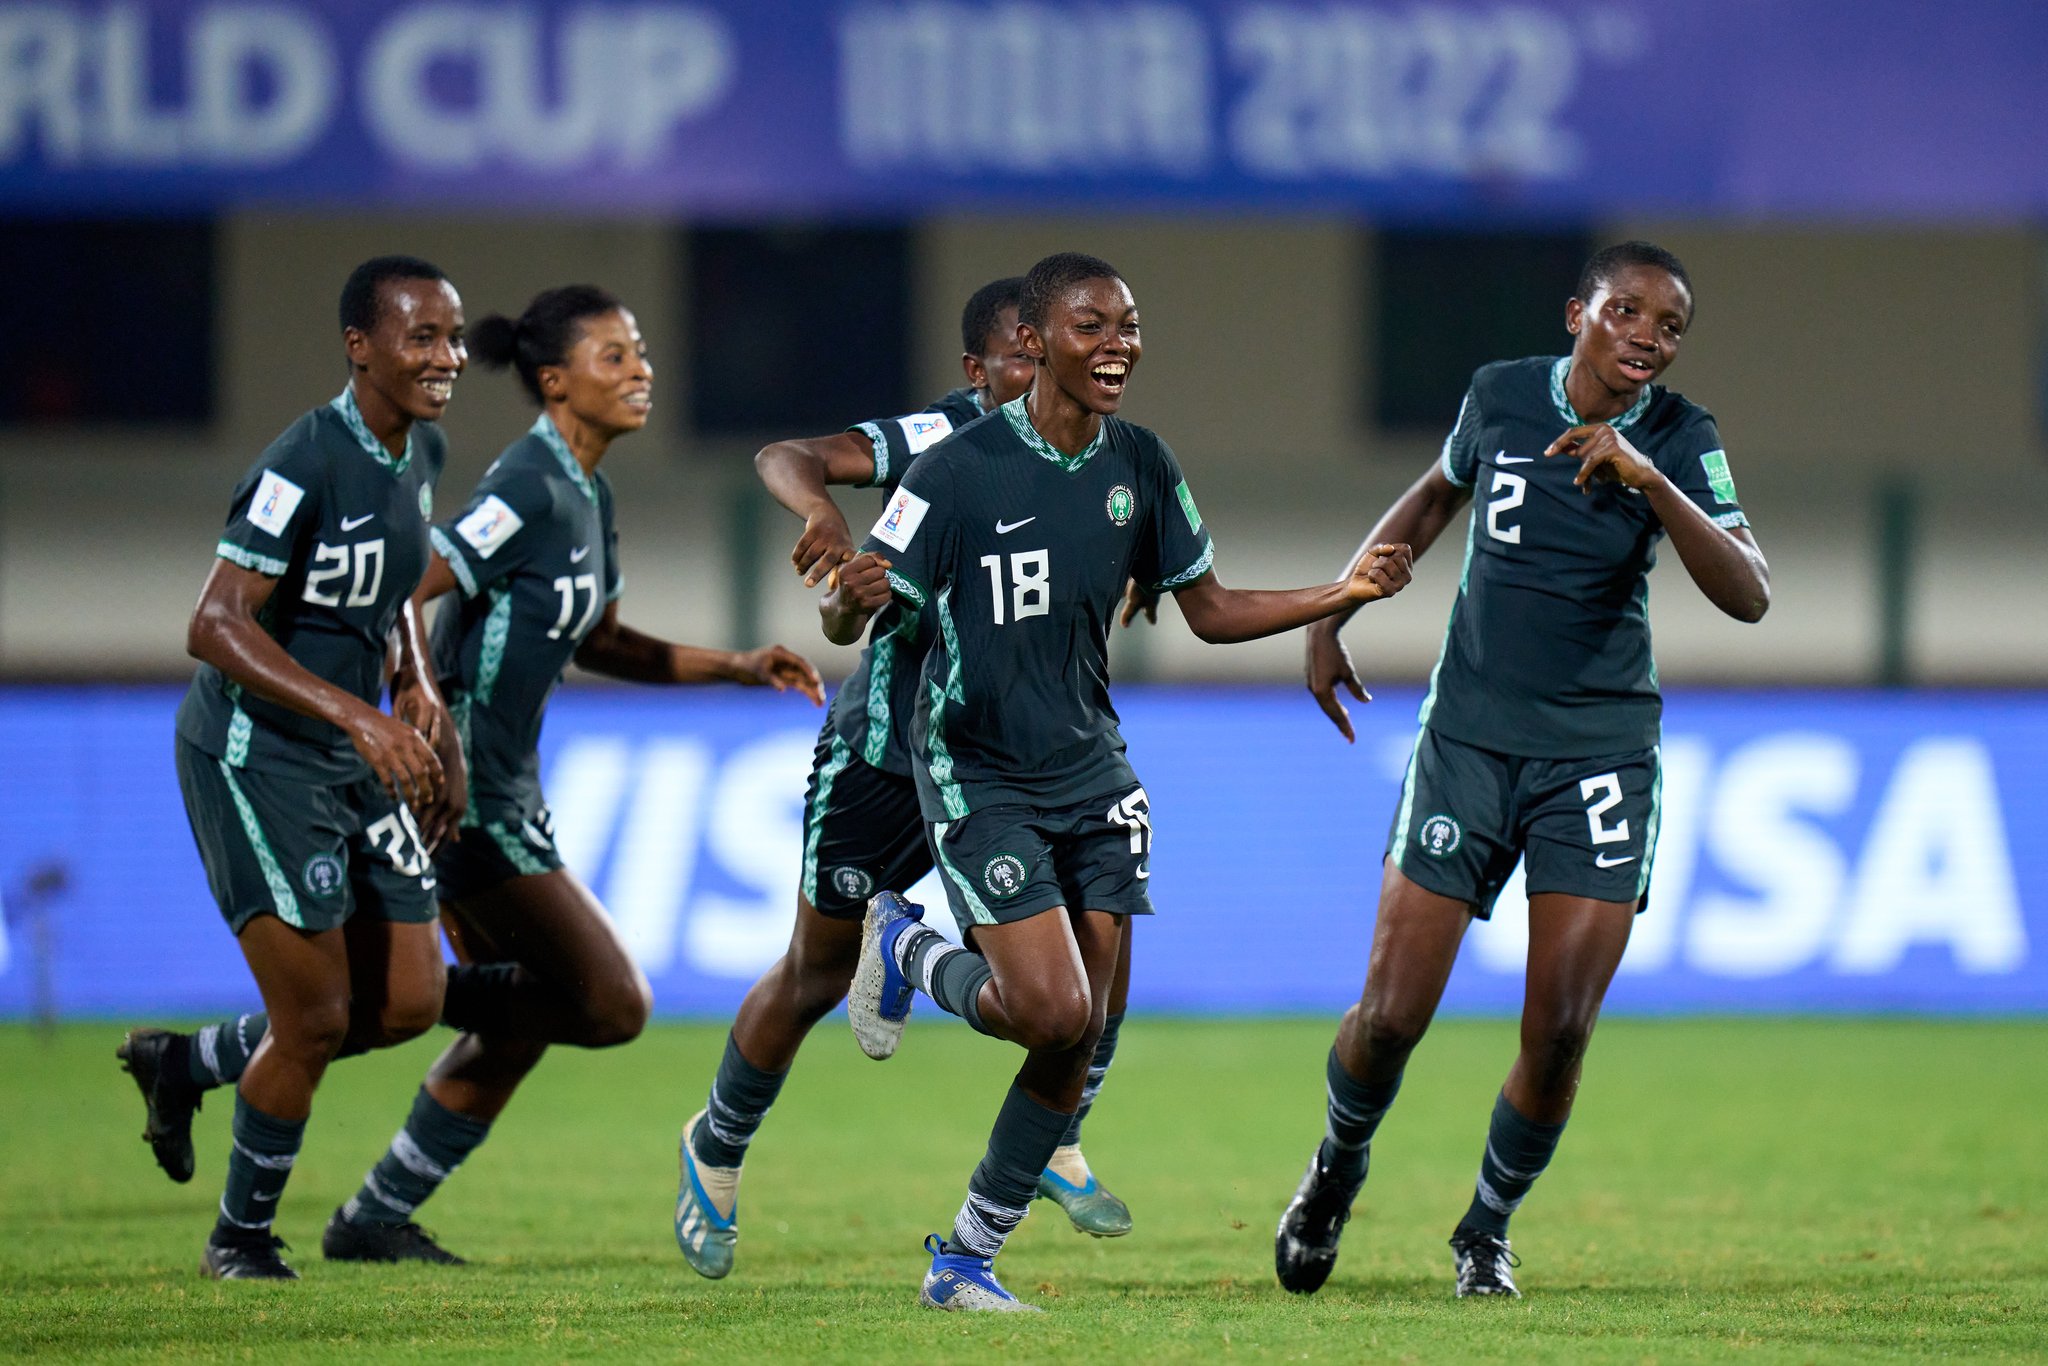 Flamingos of Nigeria don qualify for Women’s U-17 World Cup semi final for the first time in history